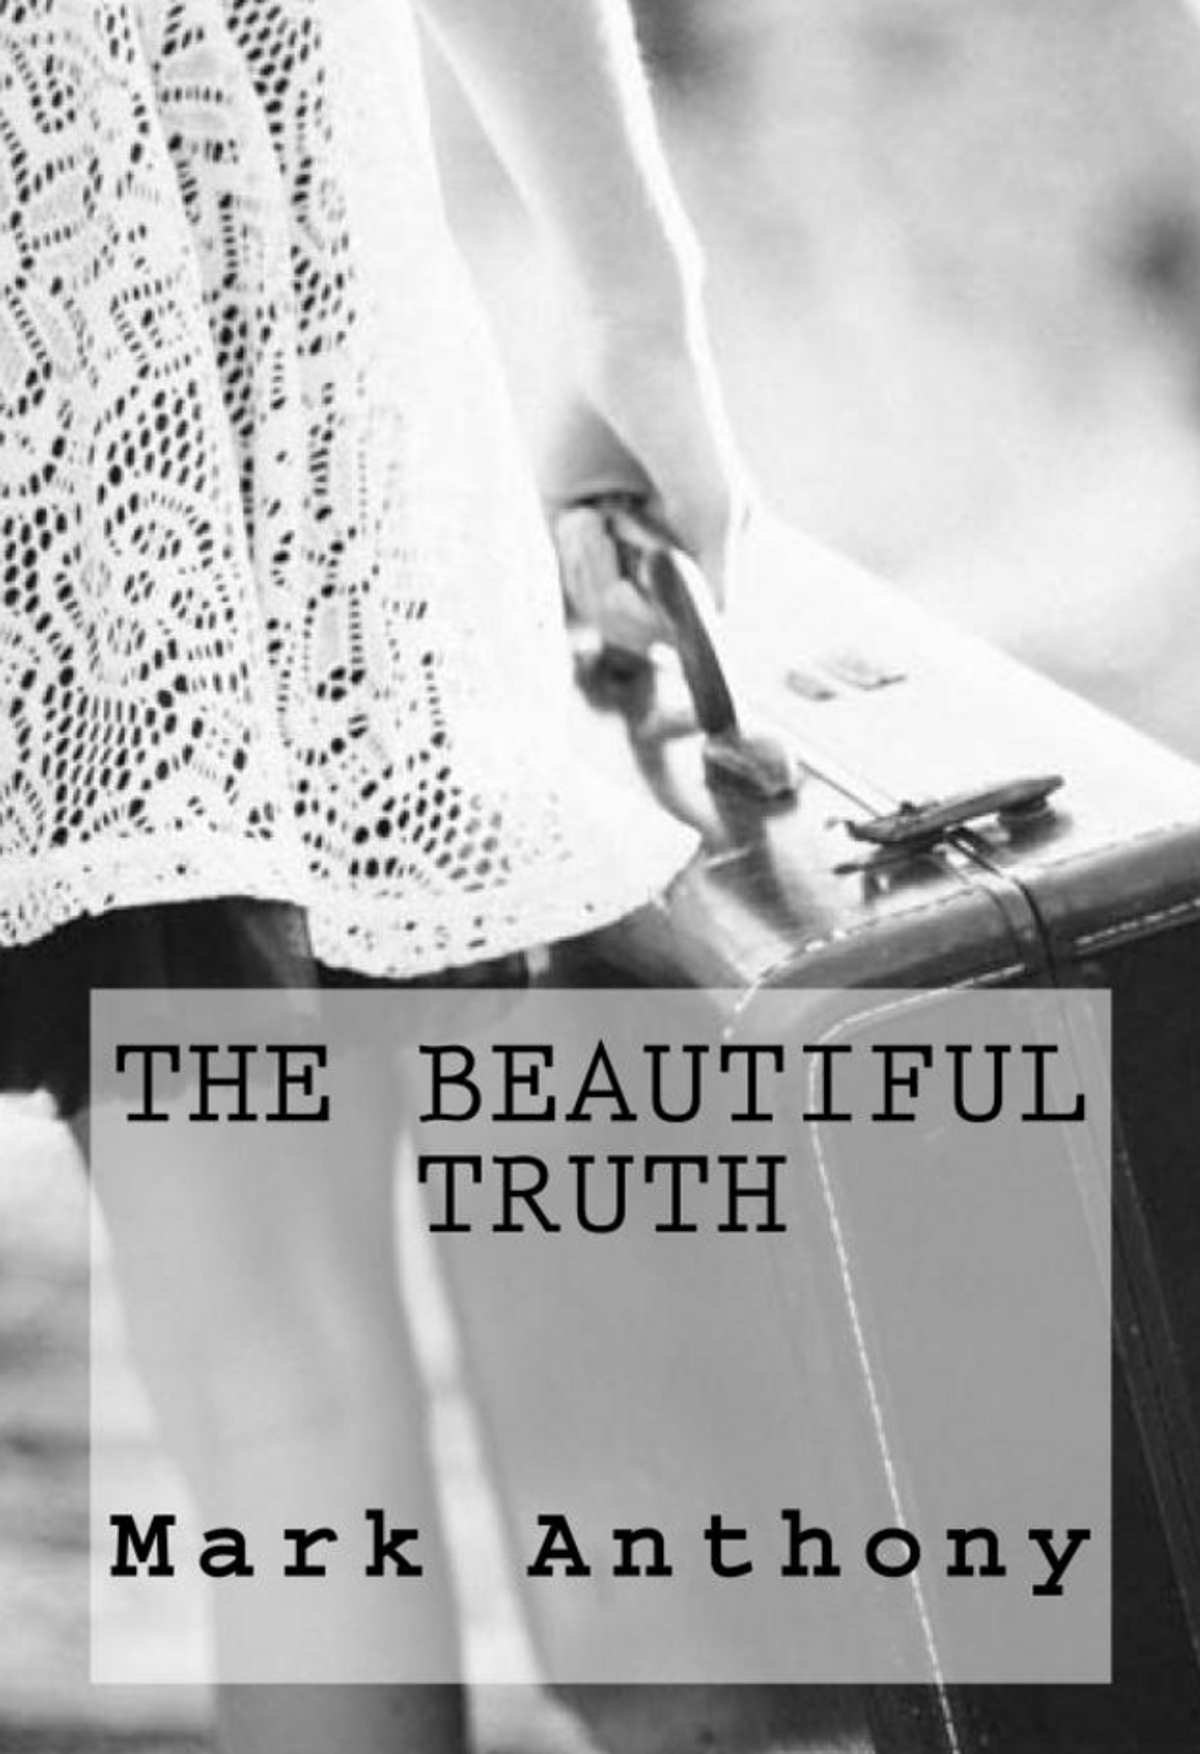 30 Poems From Mark Anthony's "The Beautiful Truth" That are a Must Read